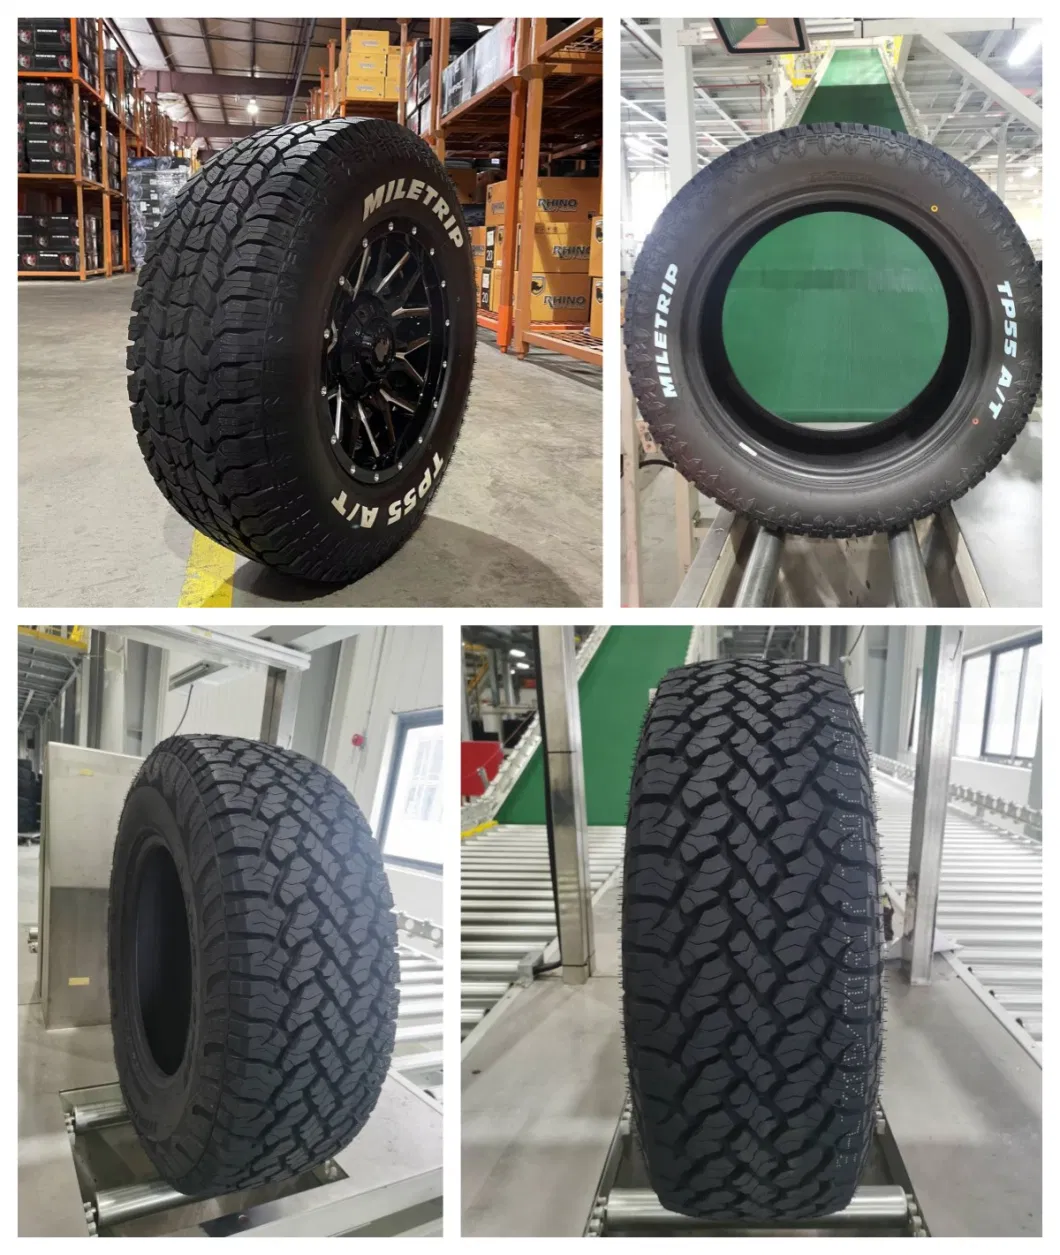 Light Truck Tyres 4x4 AT RT MT Off Road tires size LT265/75R16 with high quality white side wall summer DOT certification